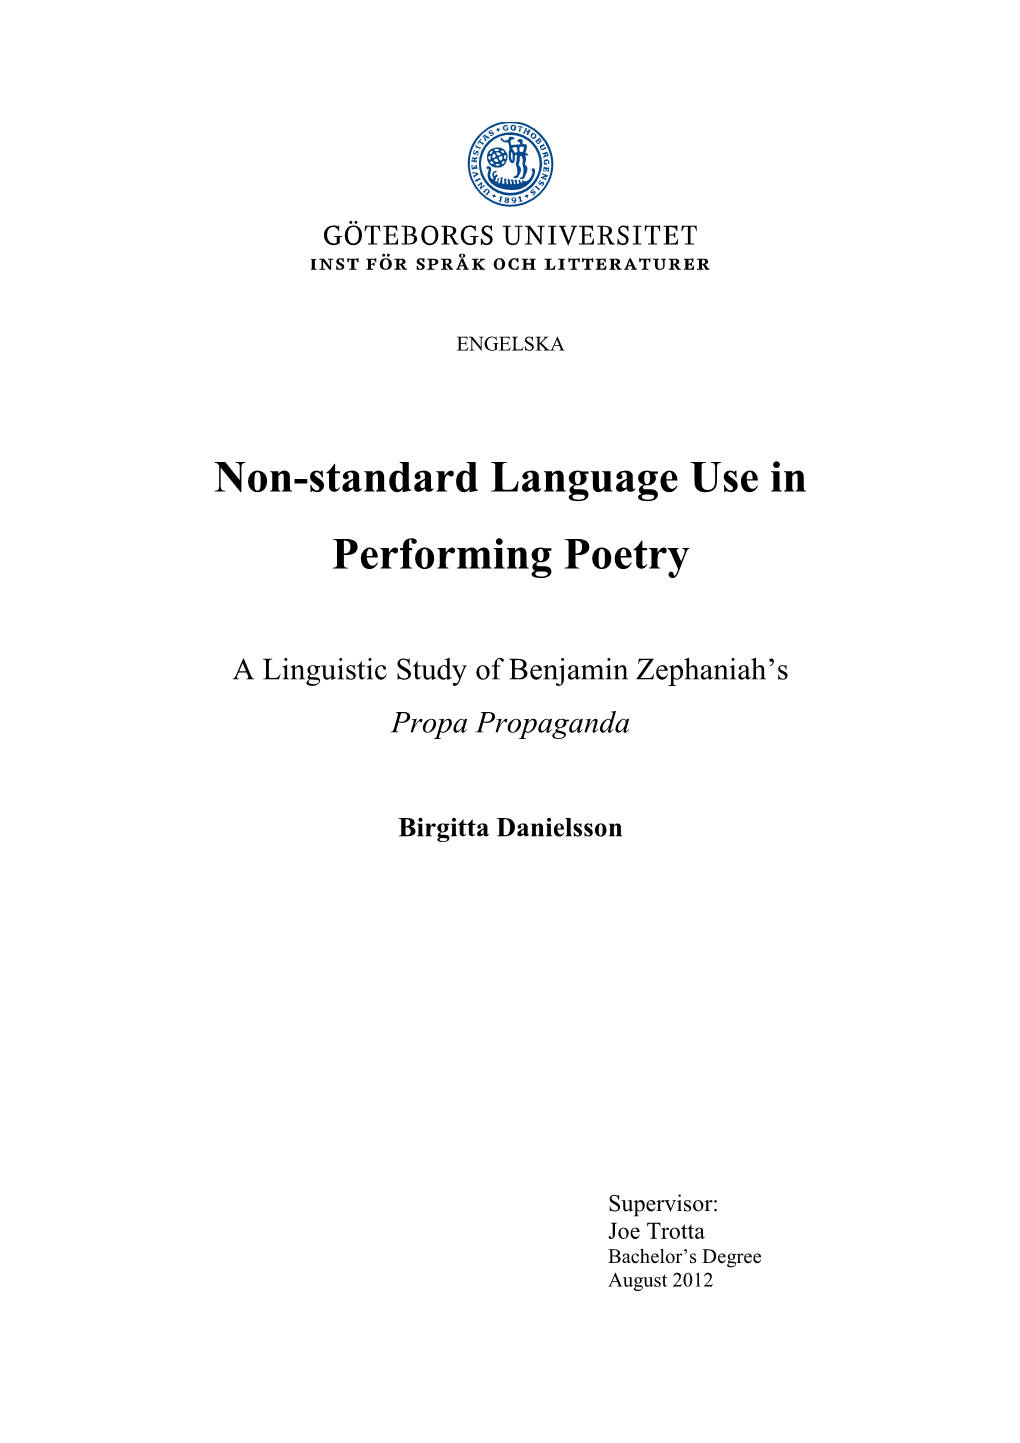 Non-Standard Language Use in Performing Poetry